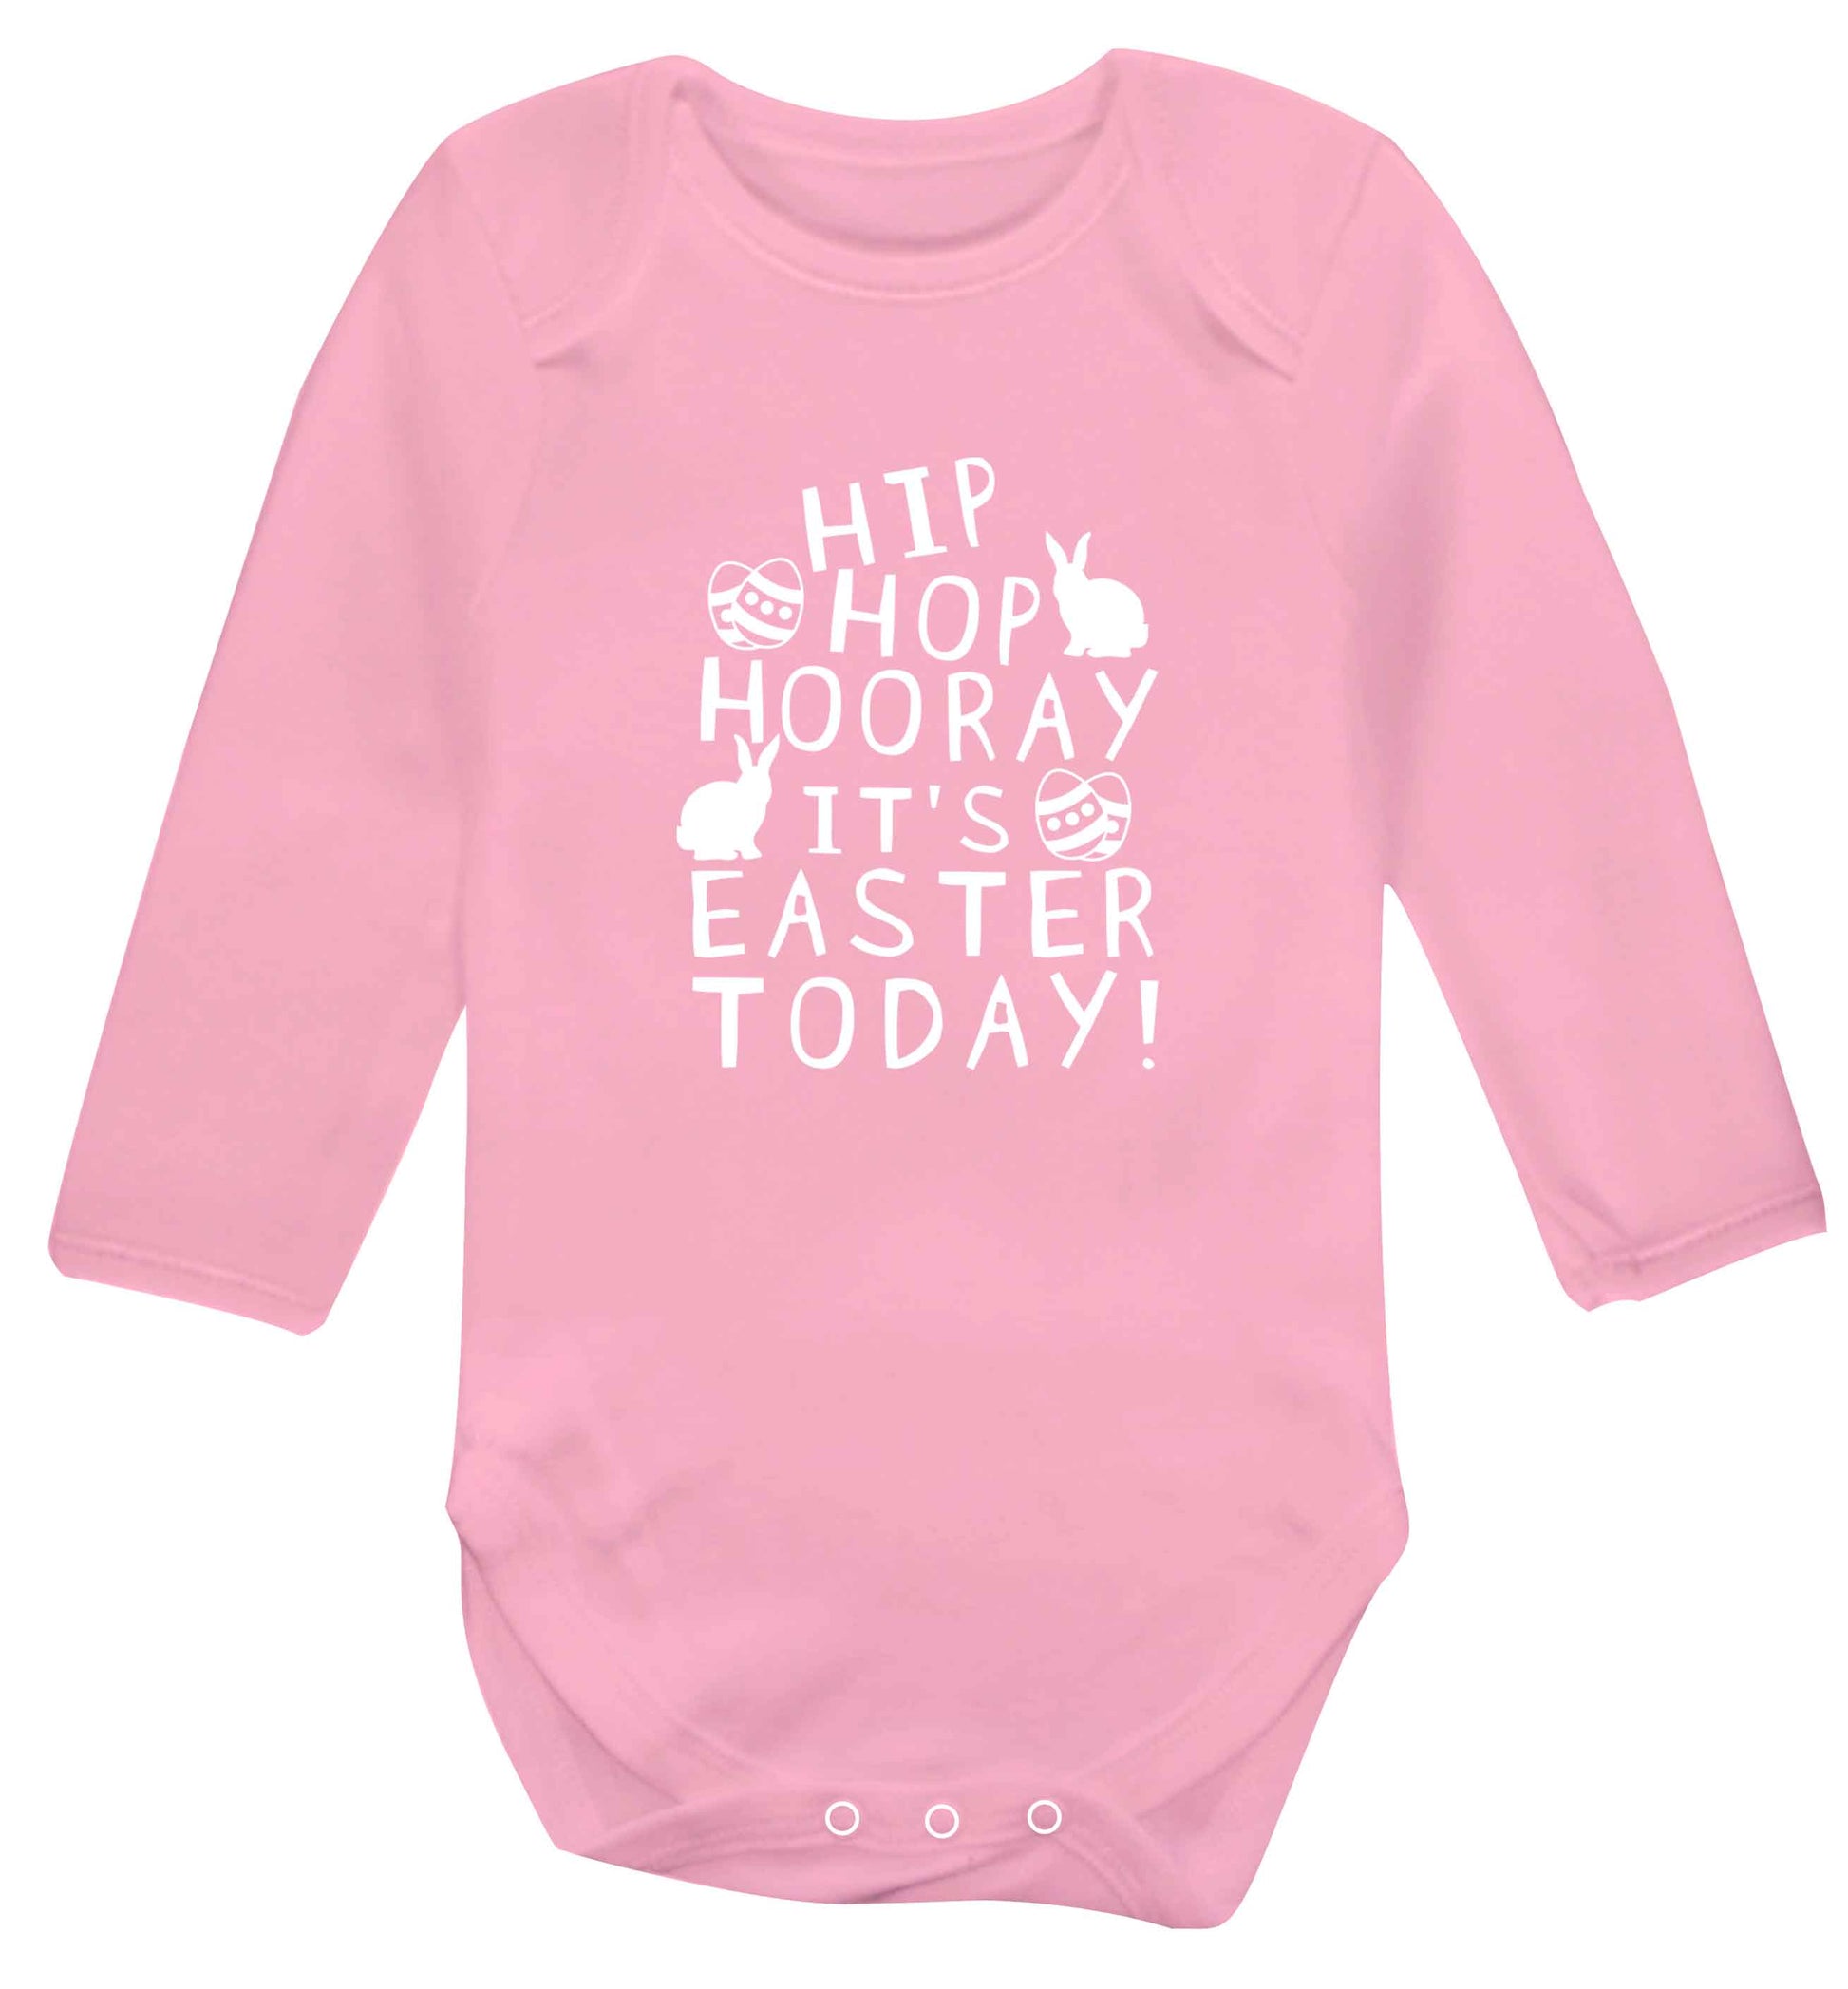 Hip hip hooray it's Easter today! baby vest long sleeved pale pink 6-12 months